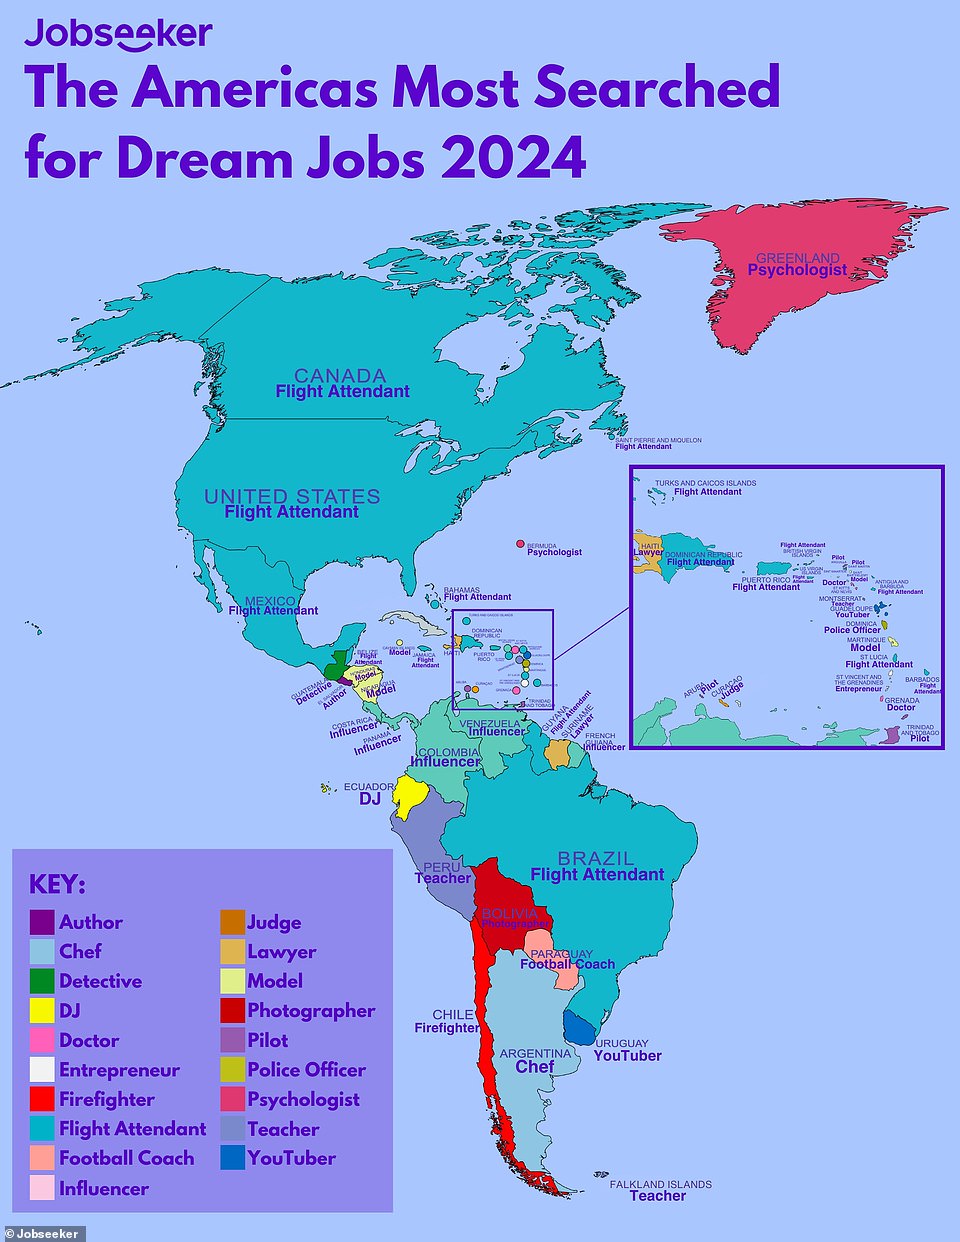 North America is clearly in love with a life of travel, as the dream job for residents of the US, Mexico and Canada is flight attendant. The results are varied throughout South America and there are no overwhelming favorites. Influencer, teacher and even soccer coach, all protagonists